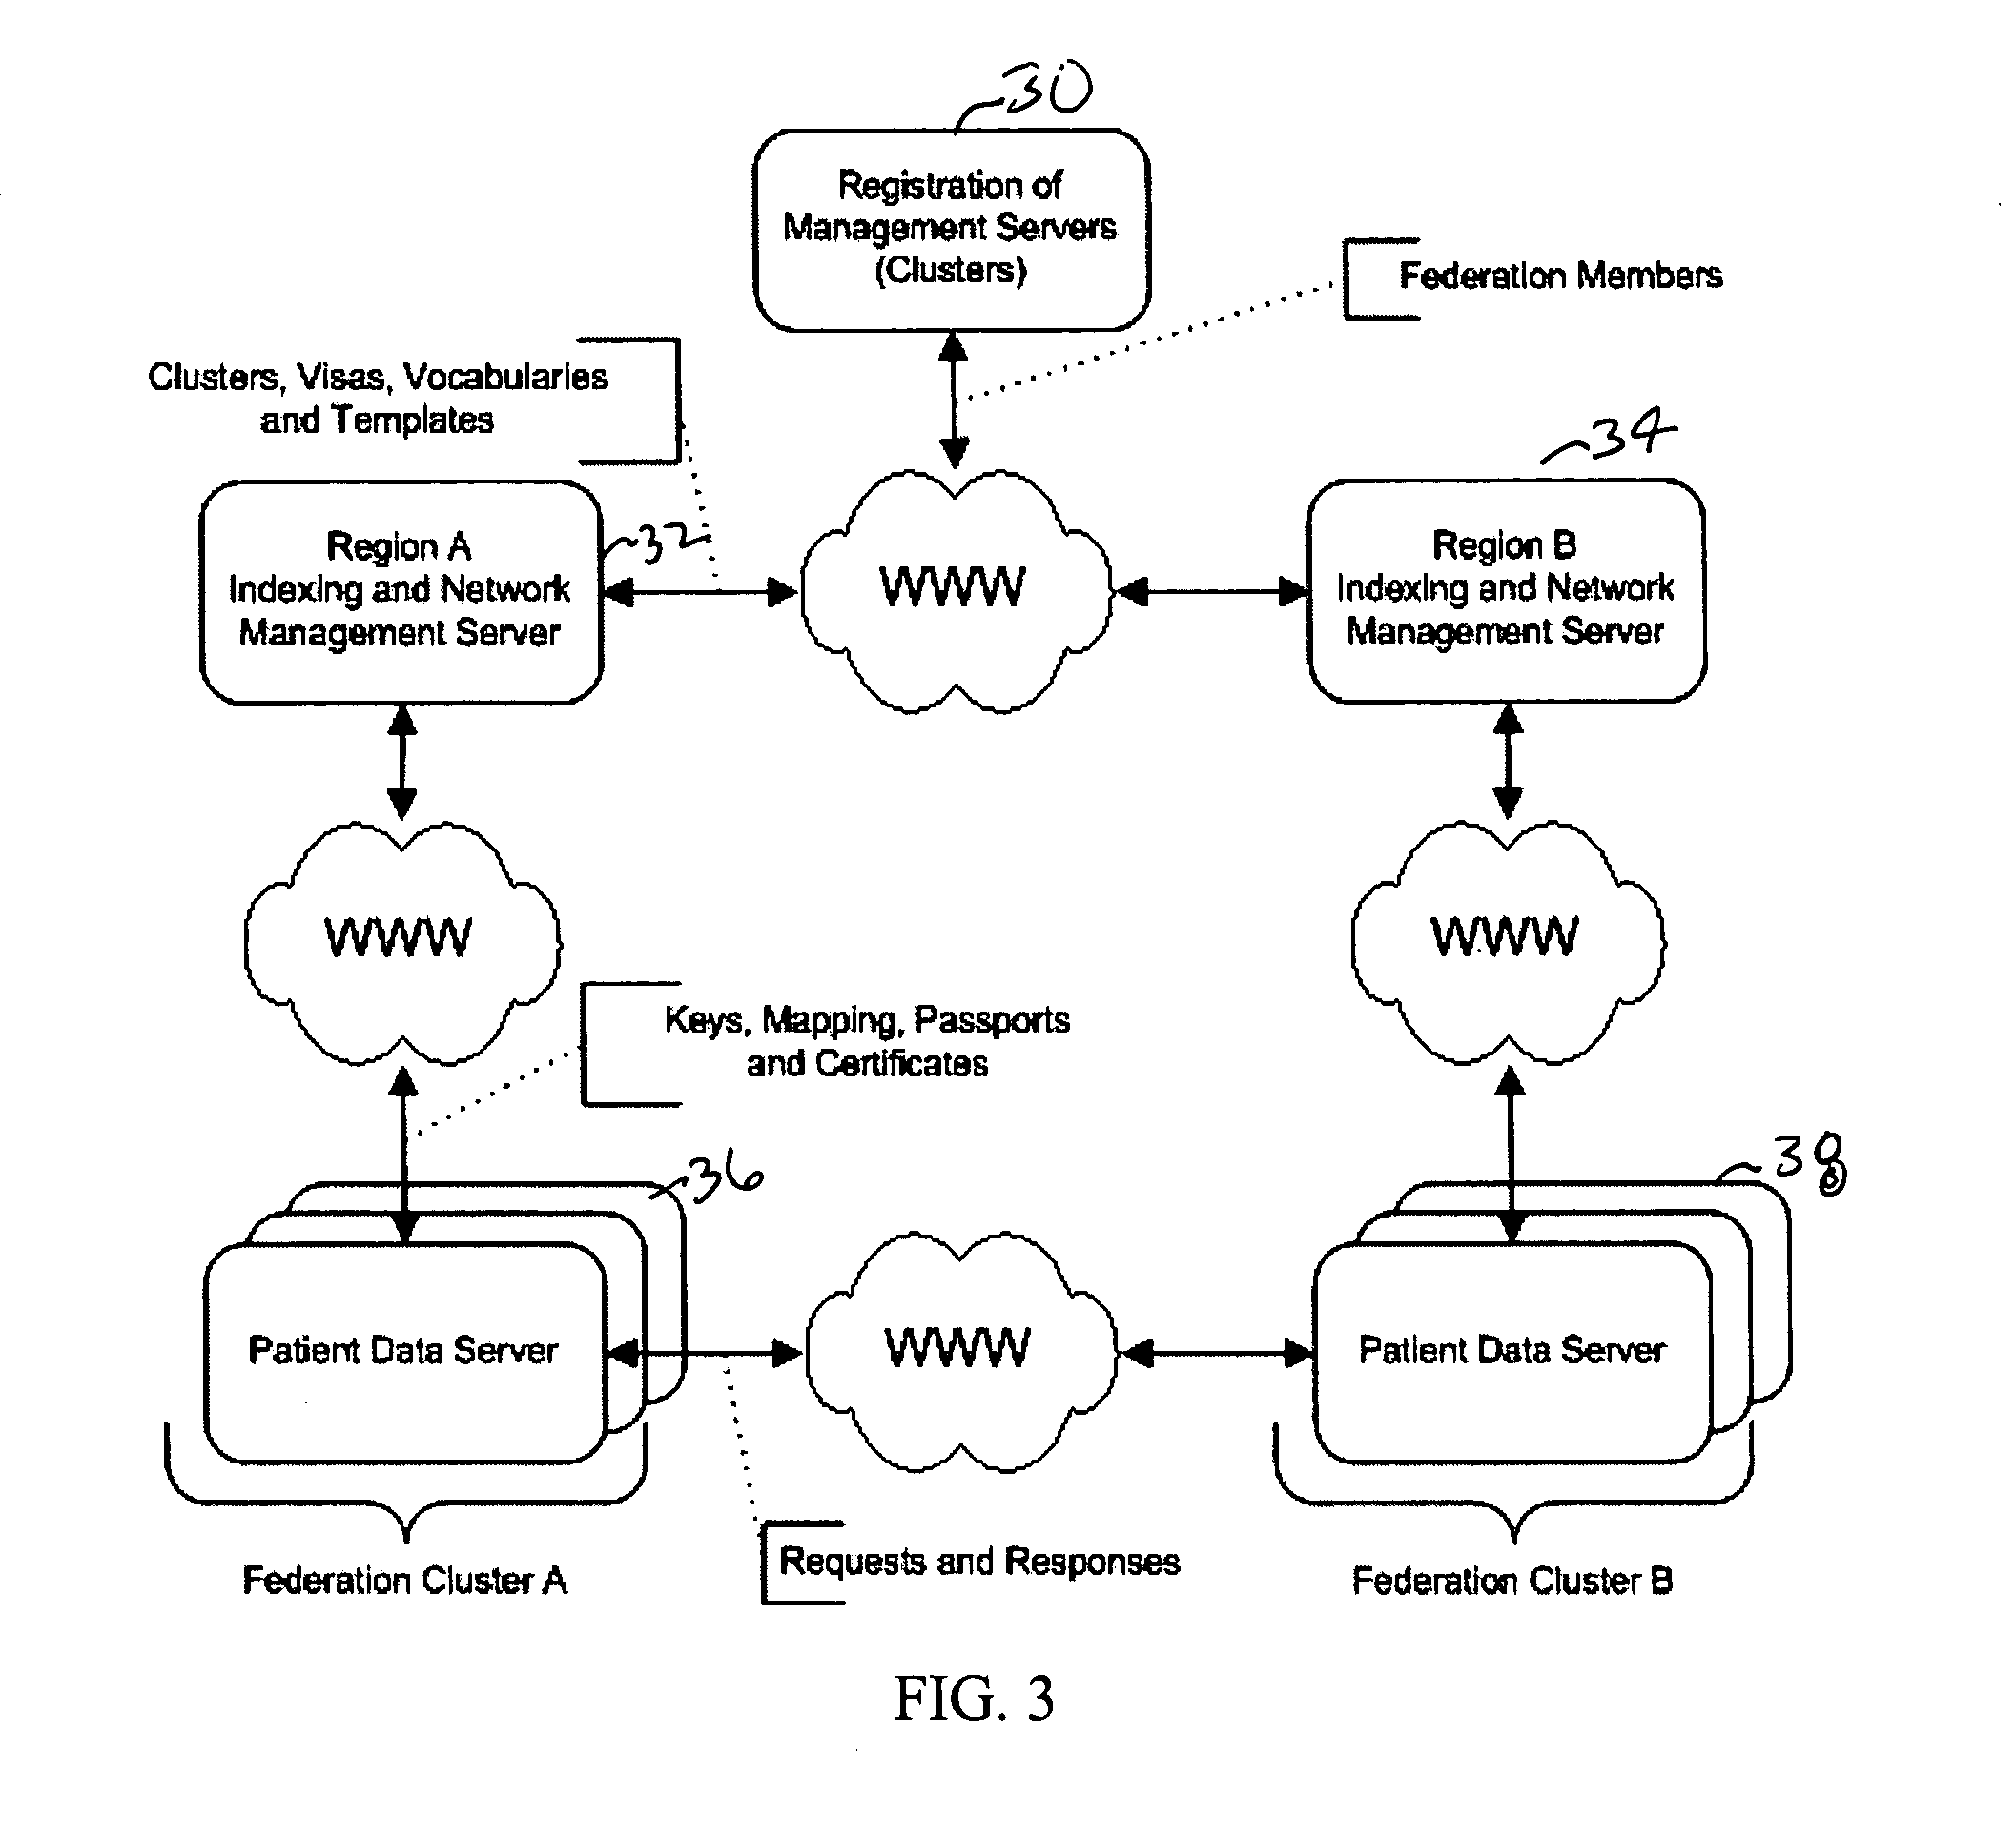 System and method for remote access data security and integrity